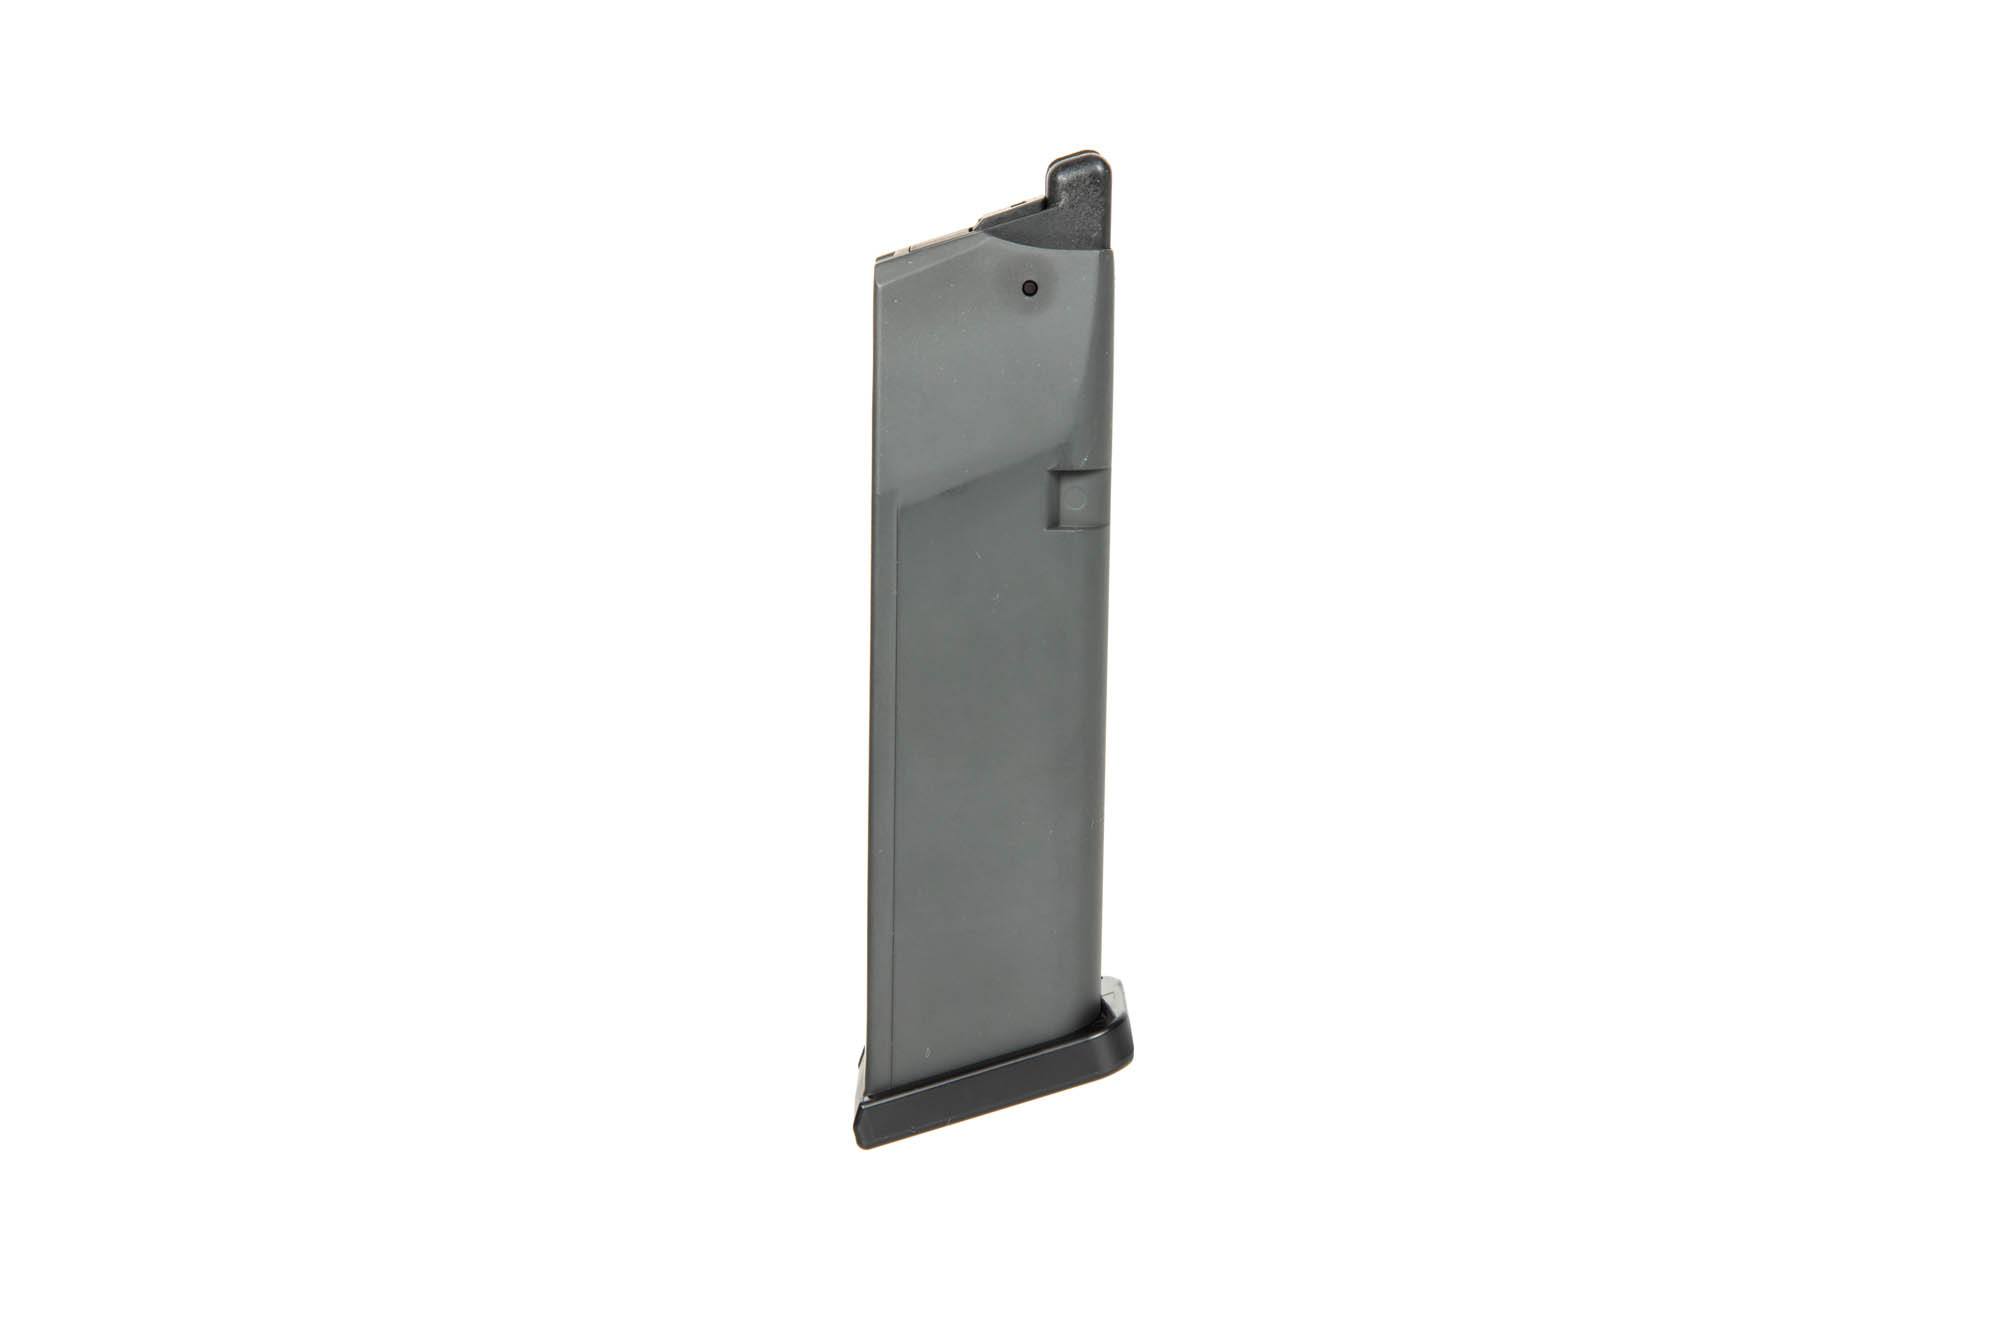 16BBs Umarex CO2 magazine for Glock 17 by Umarex on Airsoft Mania Europe